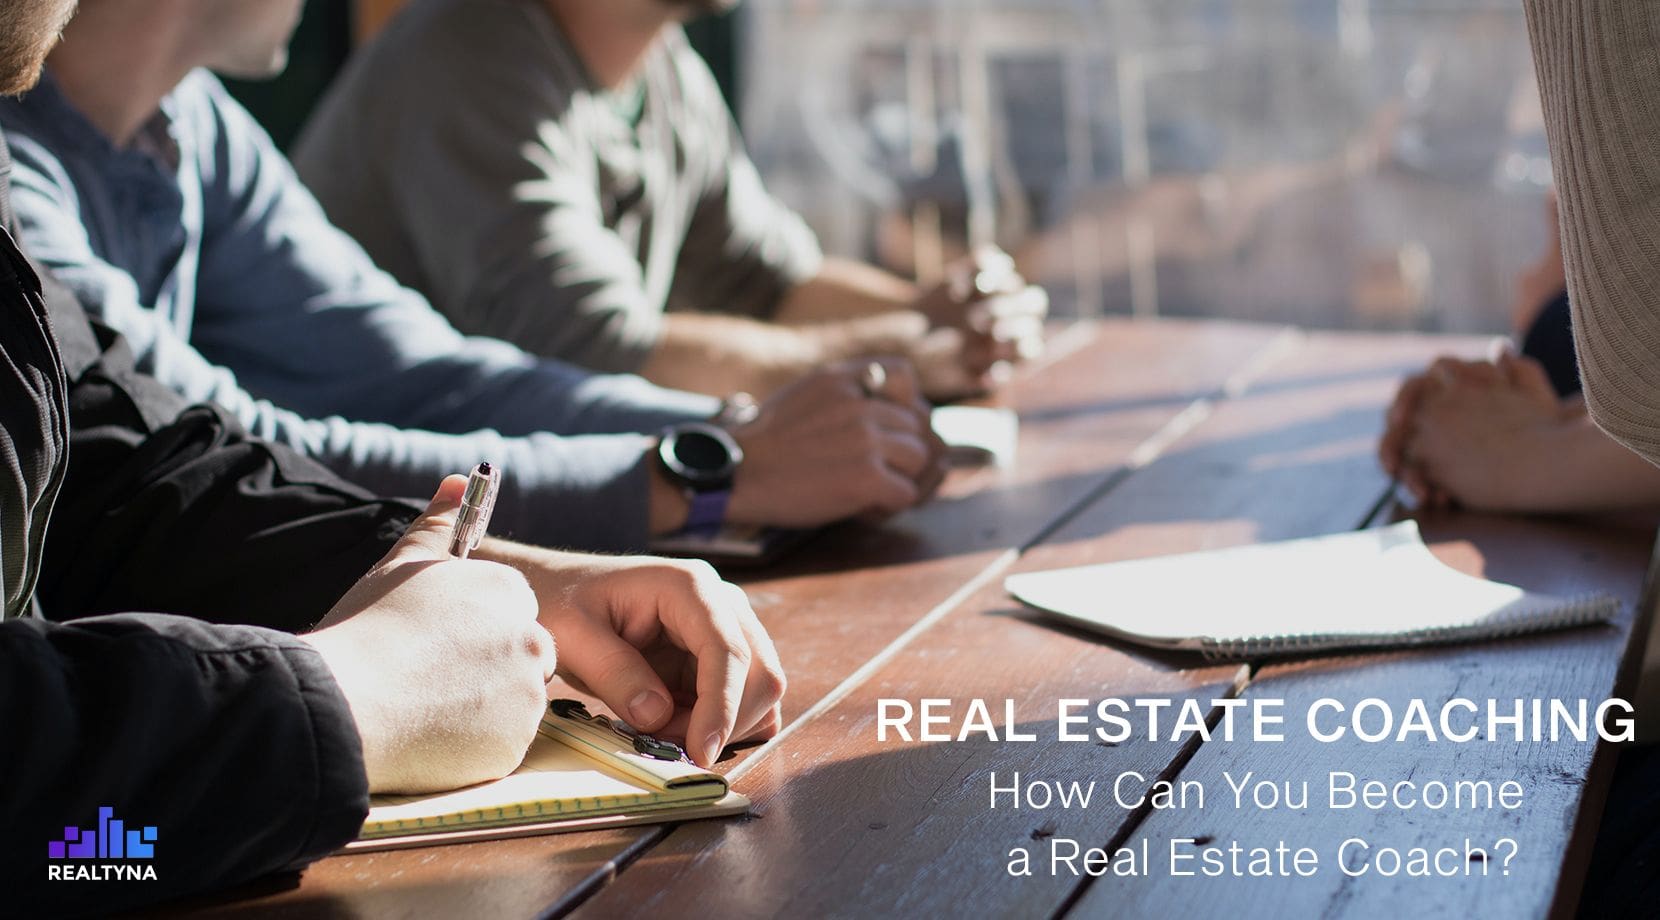 Real Estate Coaching - How Can You Become a Real Estate Coach?